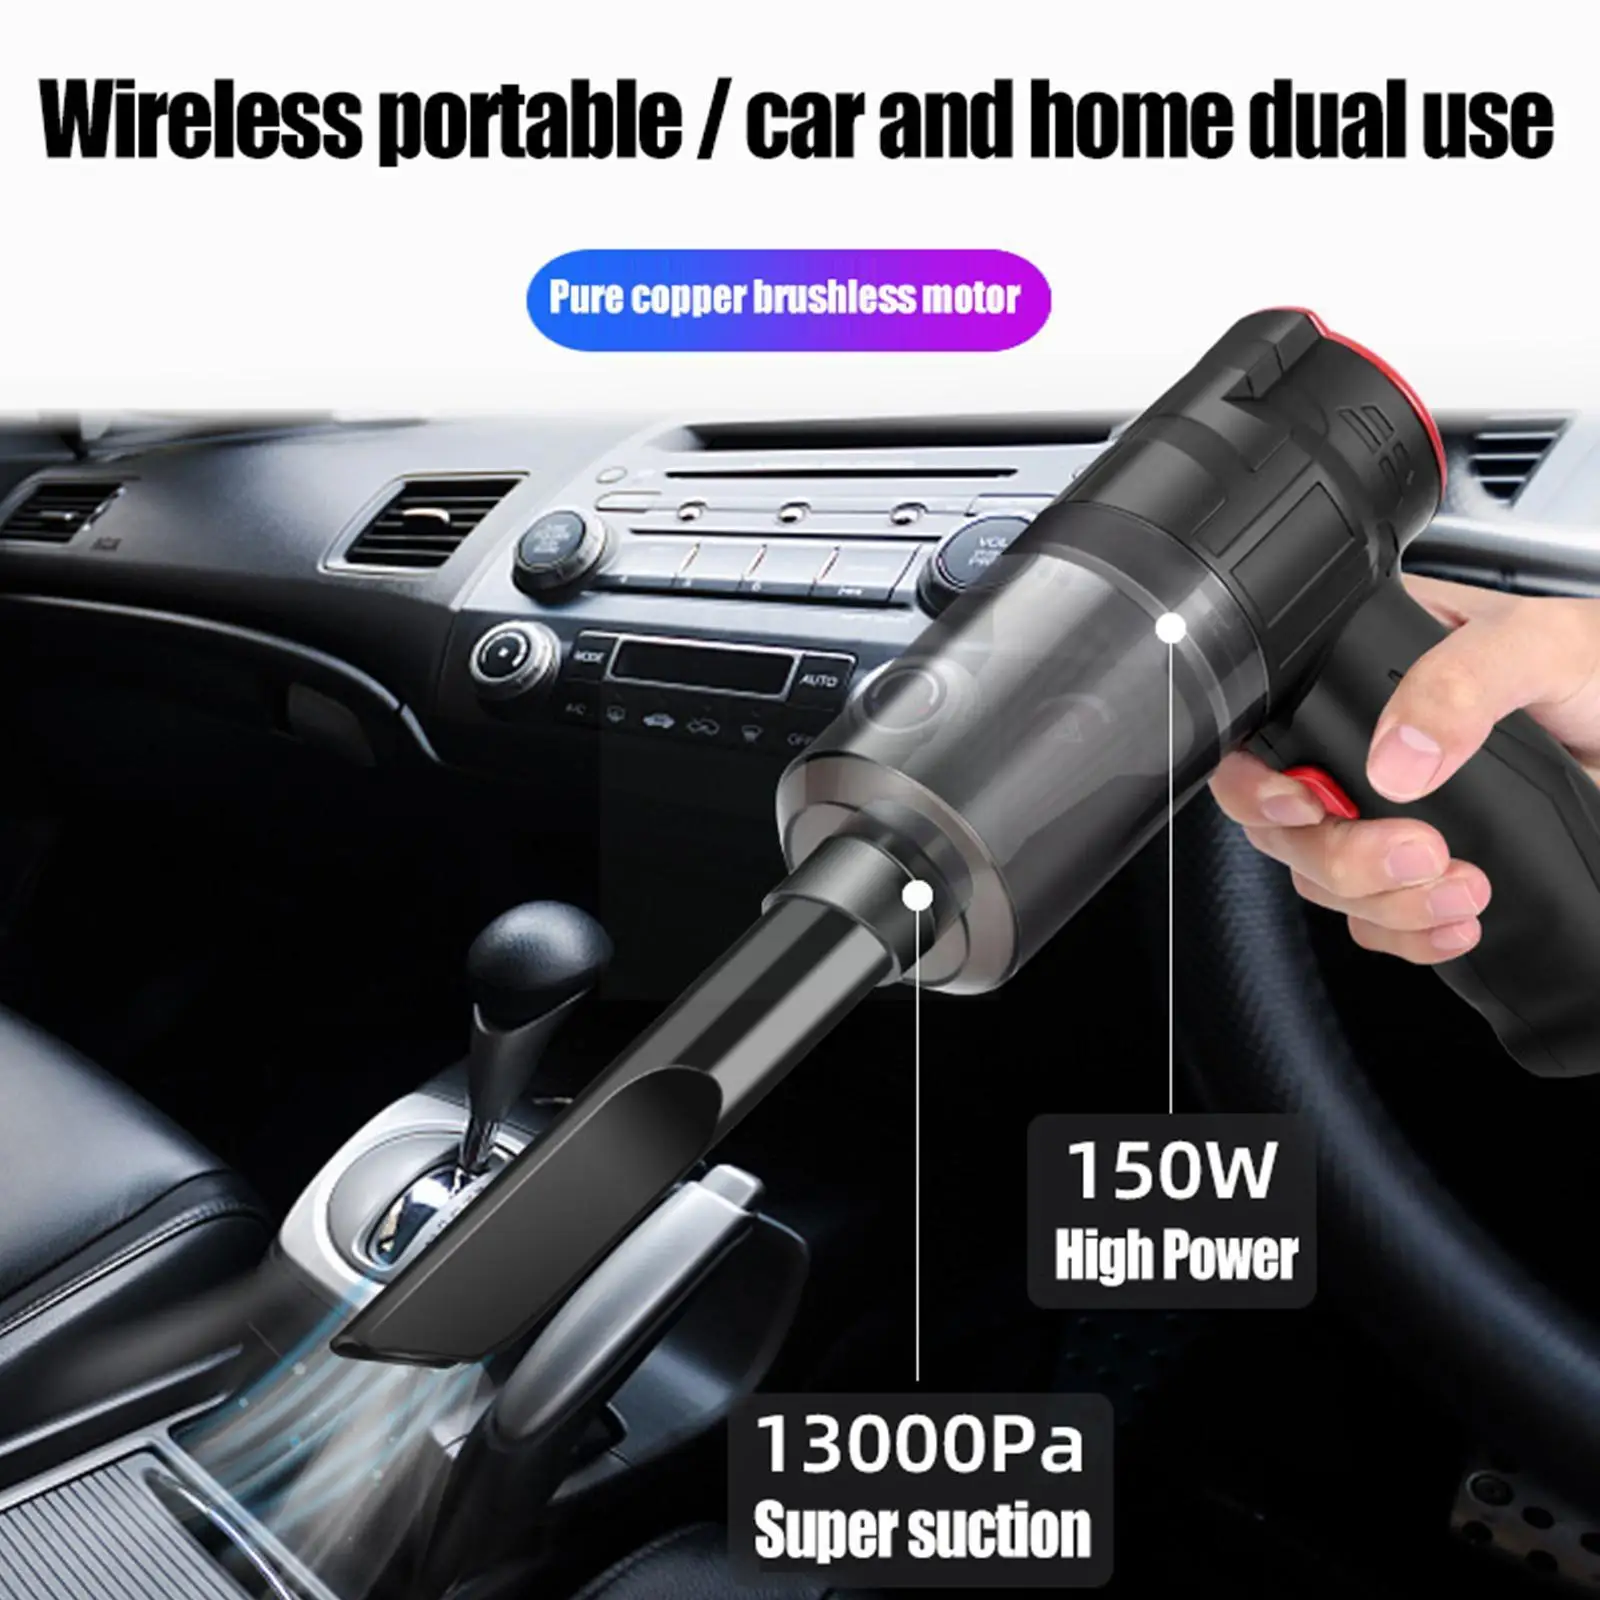 Portable Mini Car Vacuum Cleaner with 150W High Power Car Vacuum,16000PA Cordless Handheld Vacuum Cleaner Wet or Dry for Car Home Interior Cleaning 